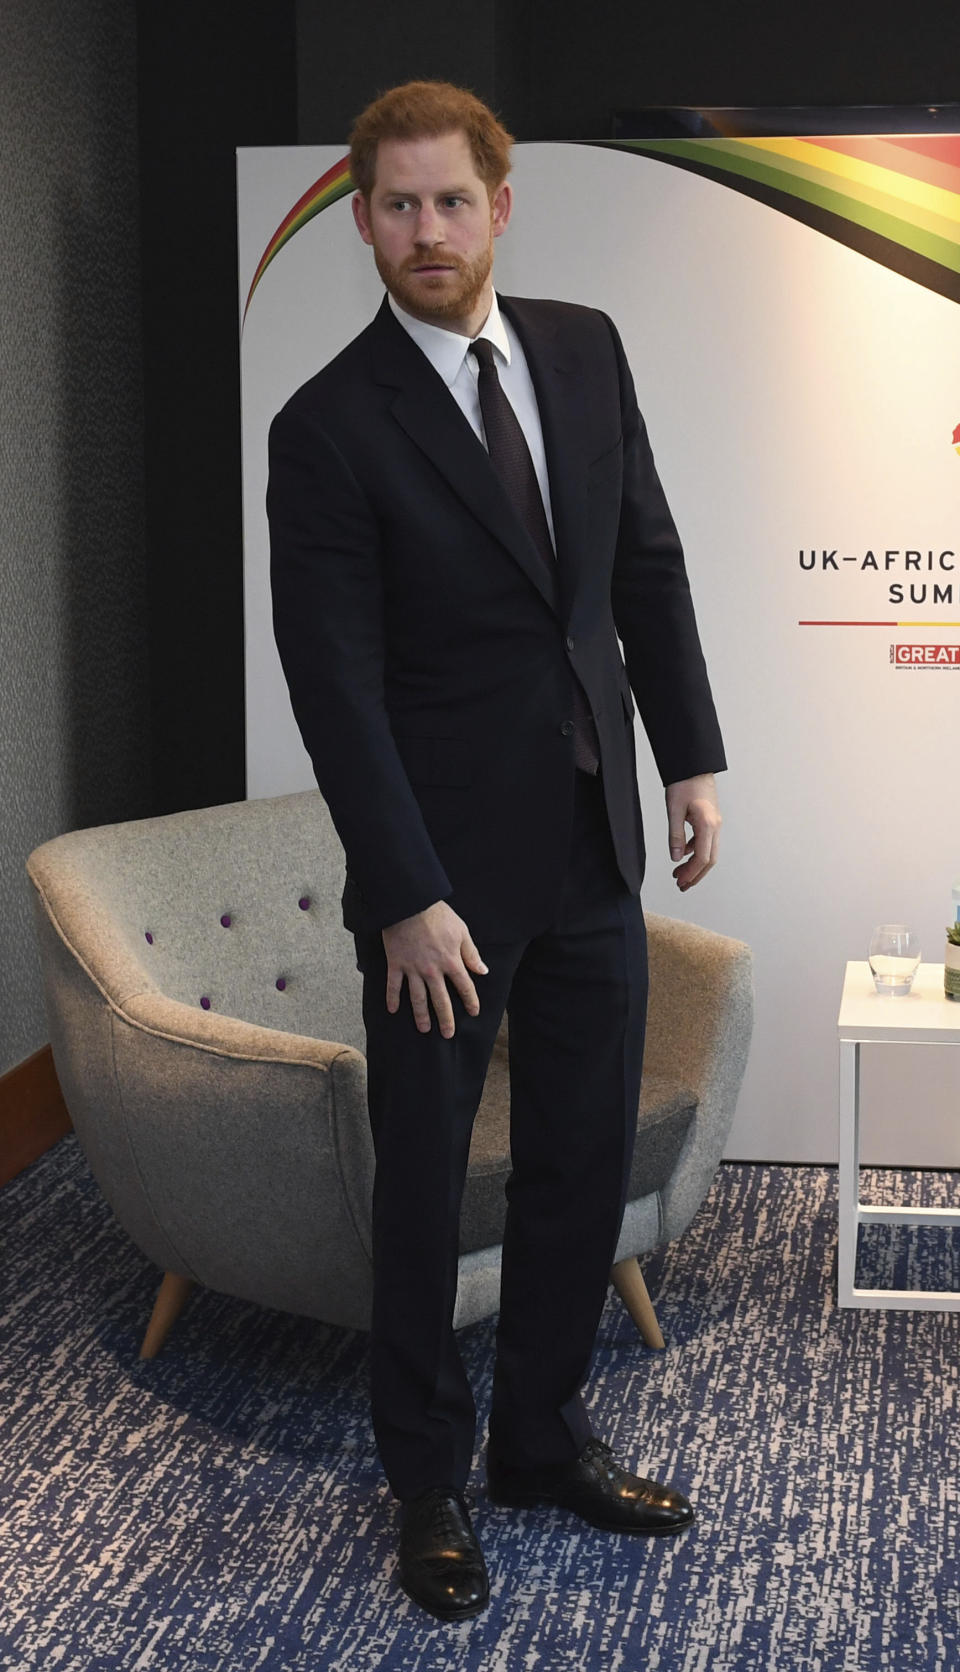 Britain's Prince Harry attends the UK Africa Investment Summit in London, Monday Jan. 20, 2020. Boris Johnson is hosting 54 African heads of state or government in London. The move comes as the U.K. prepares for post-Brexit dealings with the world. (Stefan Rousseau/Pool via AP)